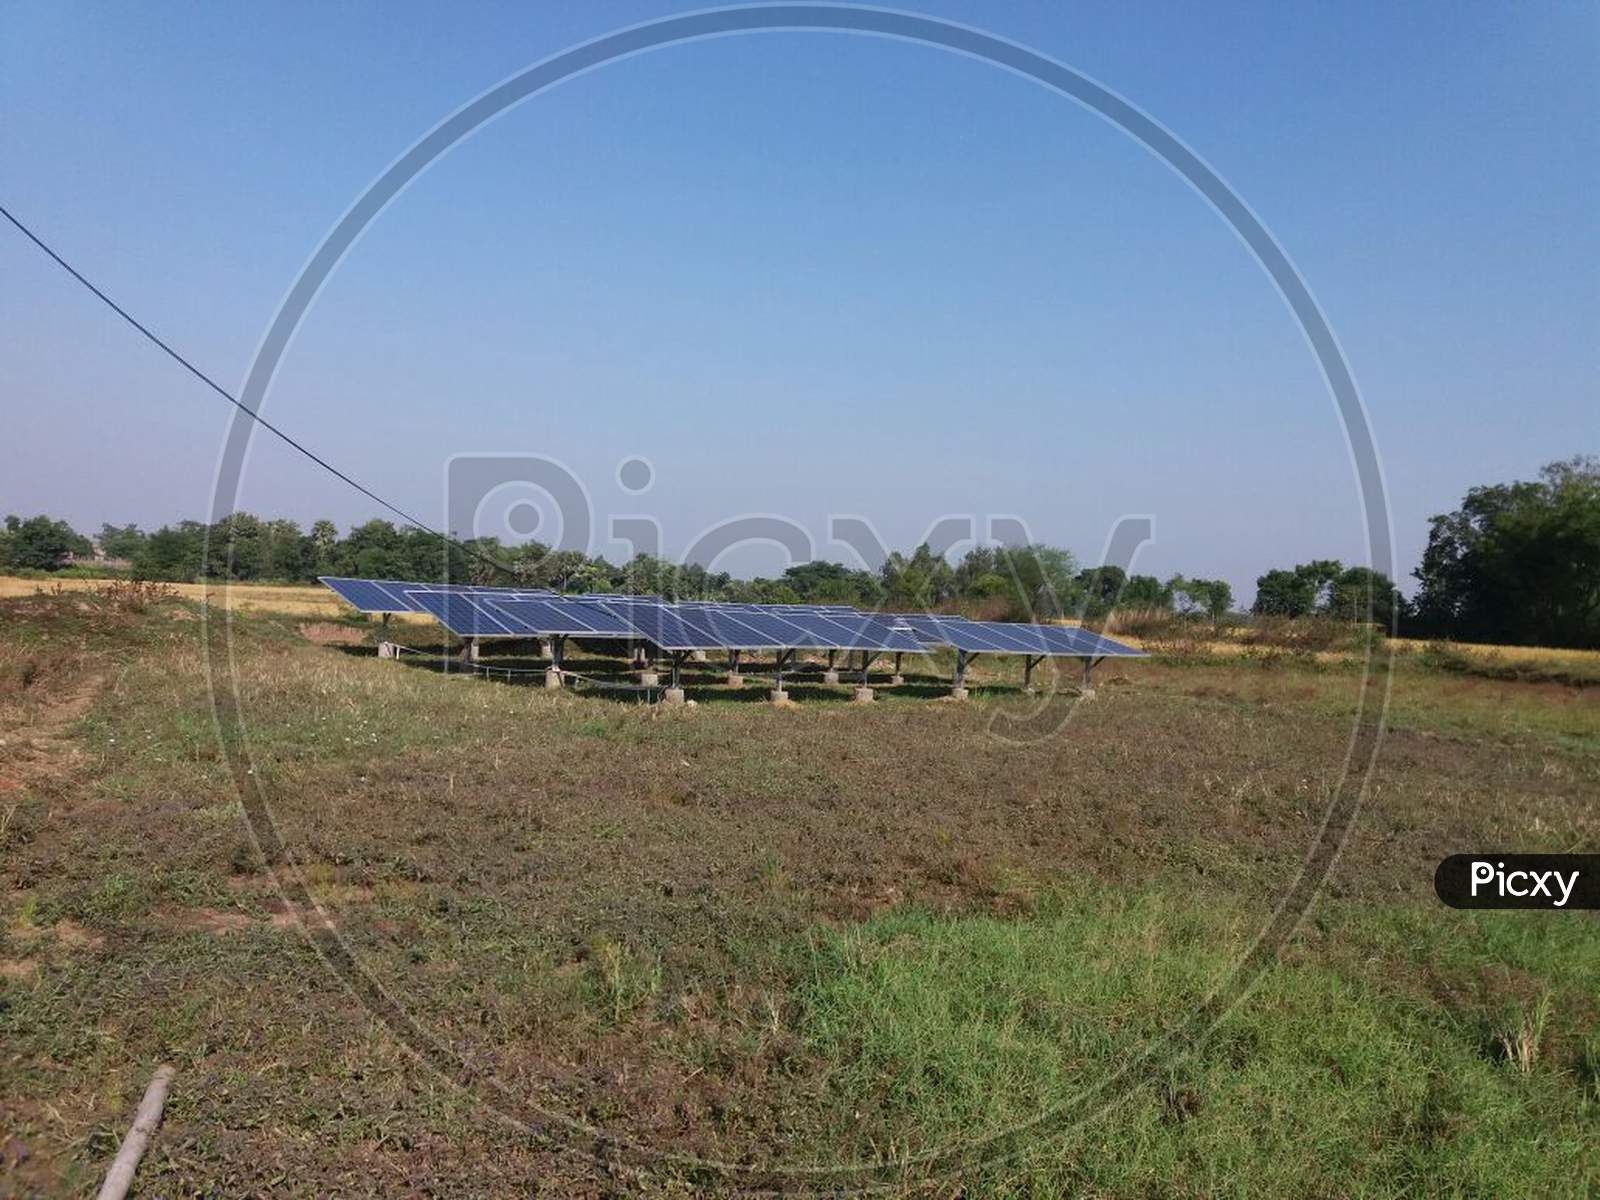 Angle view of Solar panels in field